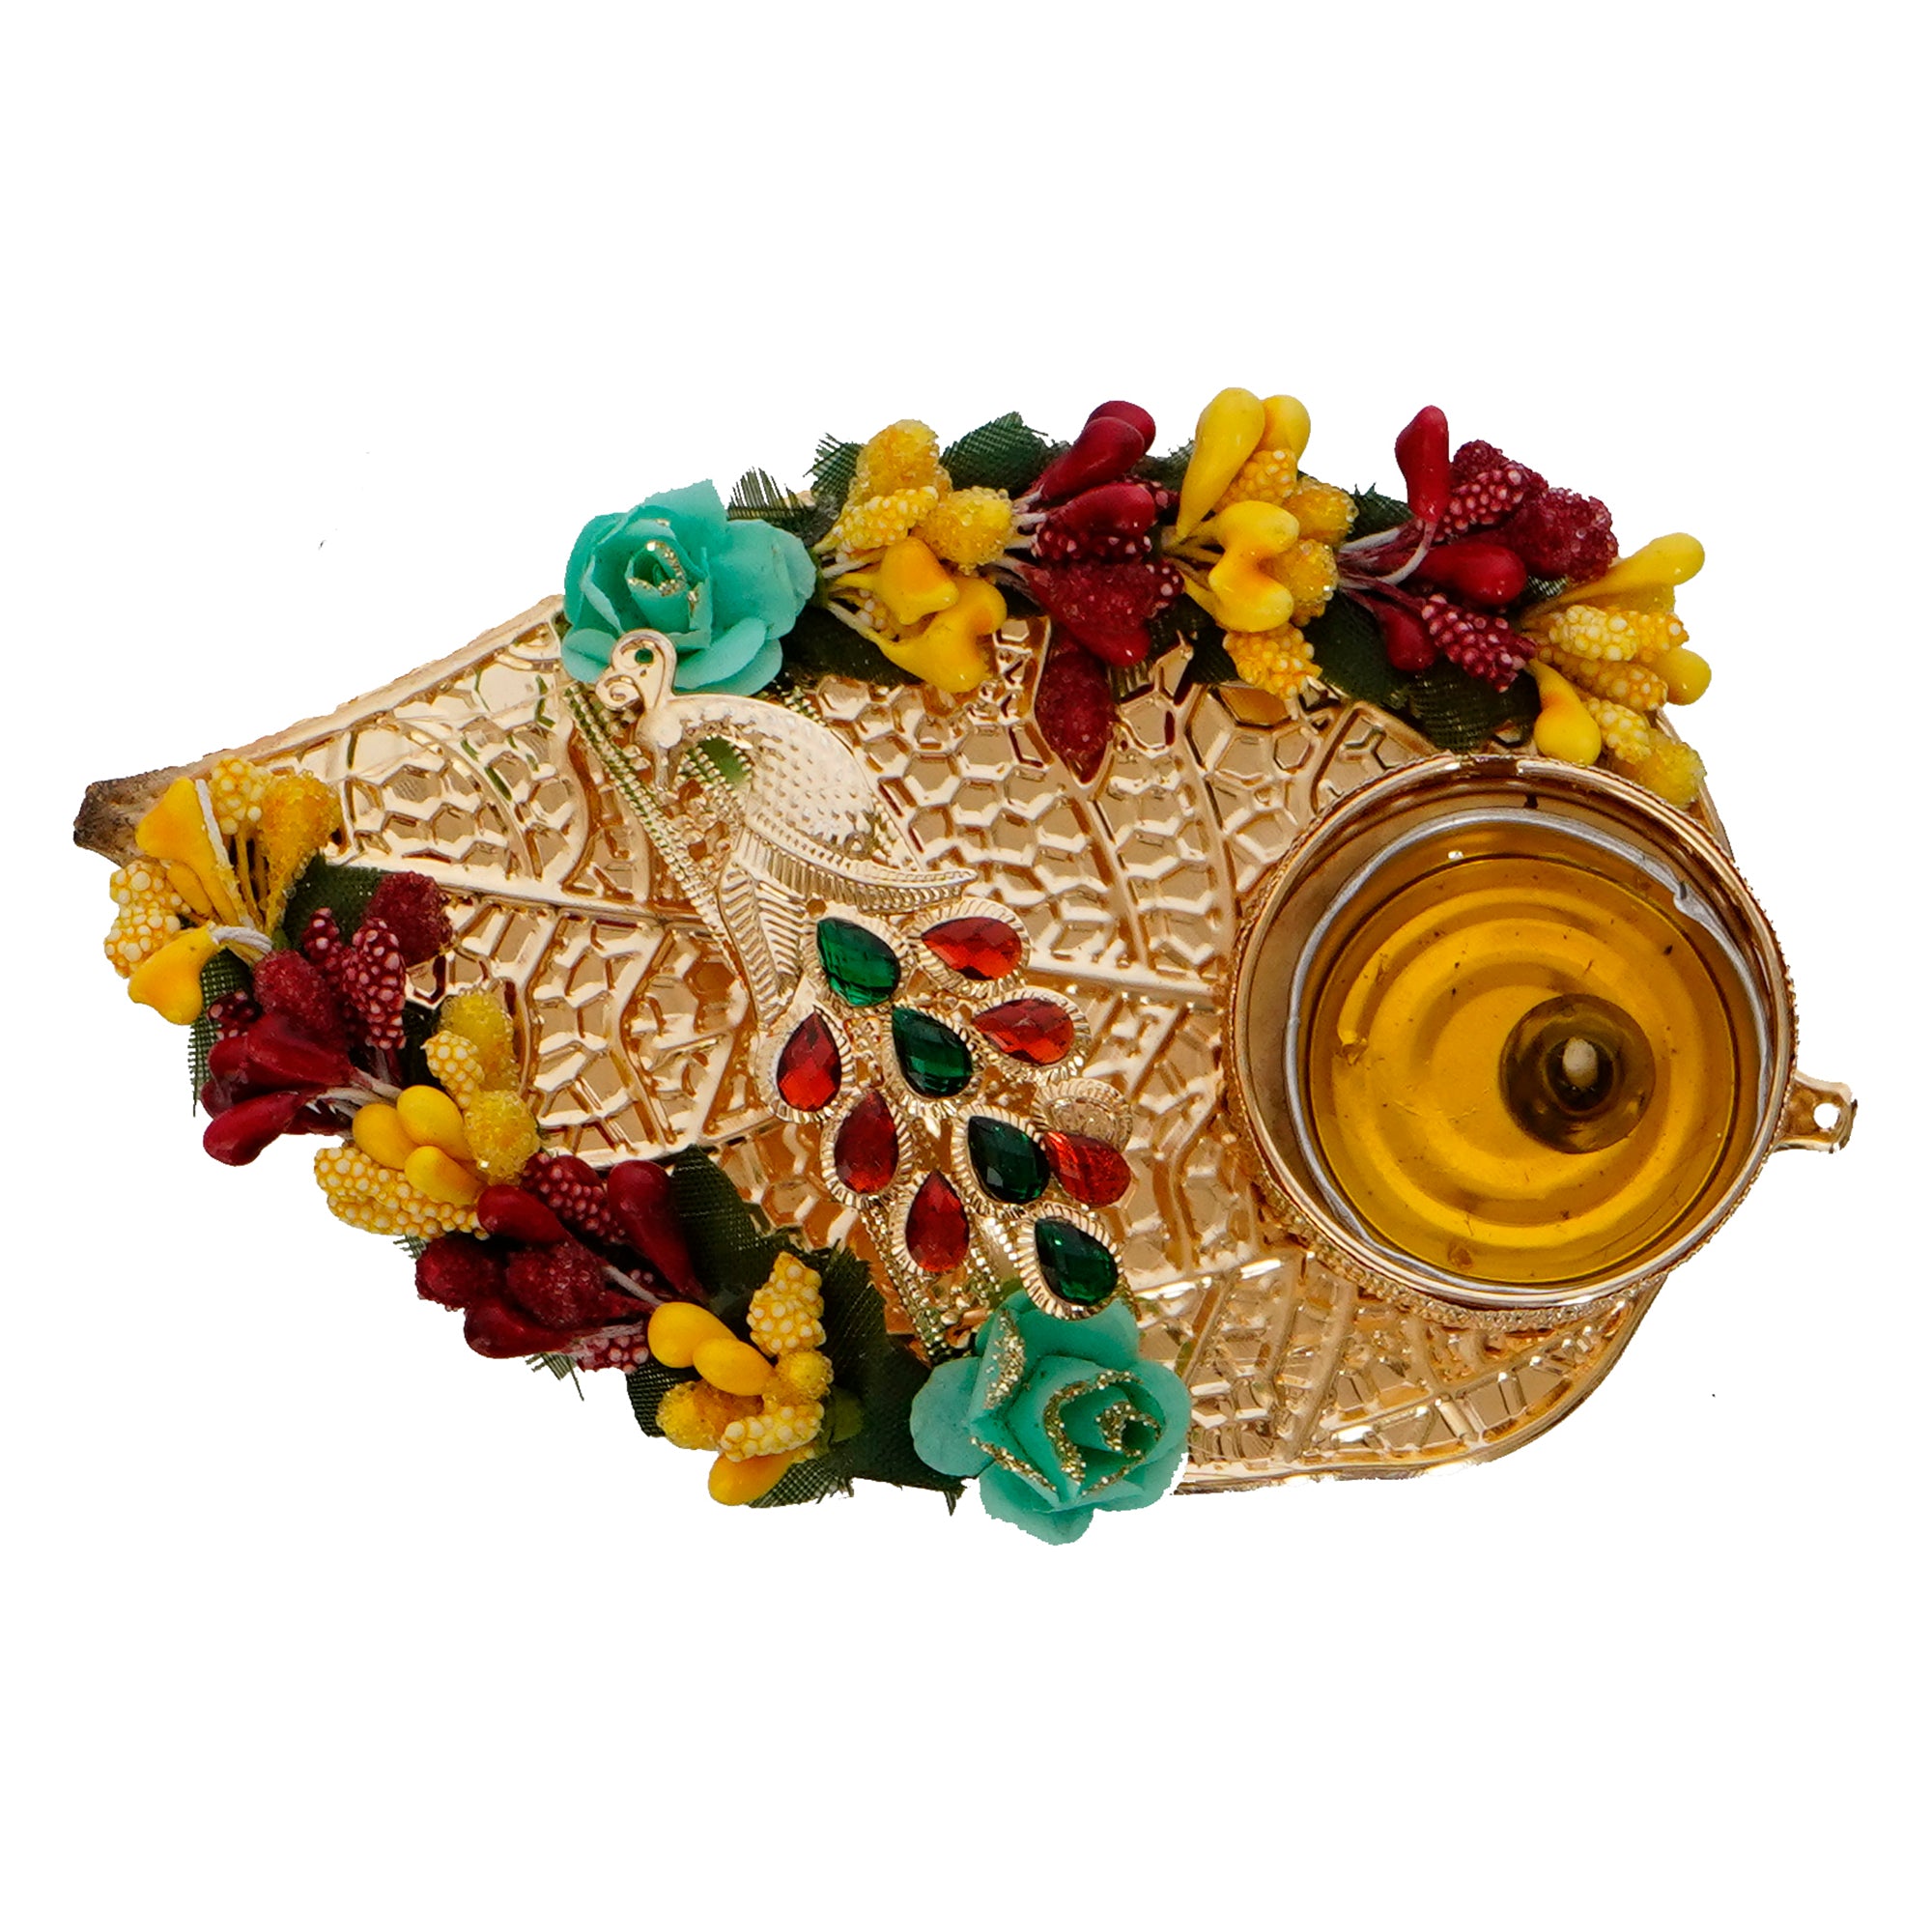 Decorative Handcrafted Yellow and Red Floral Leaf Shape Tea Light Holder 2